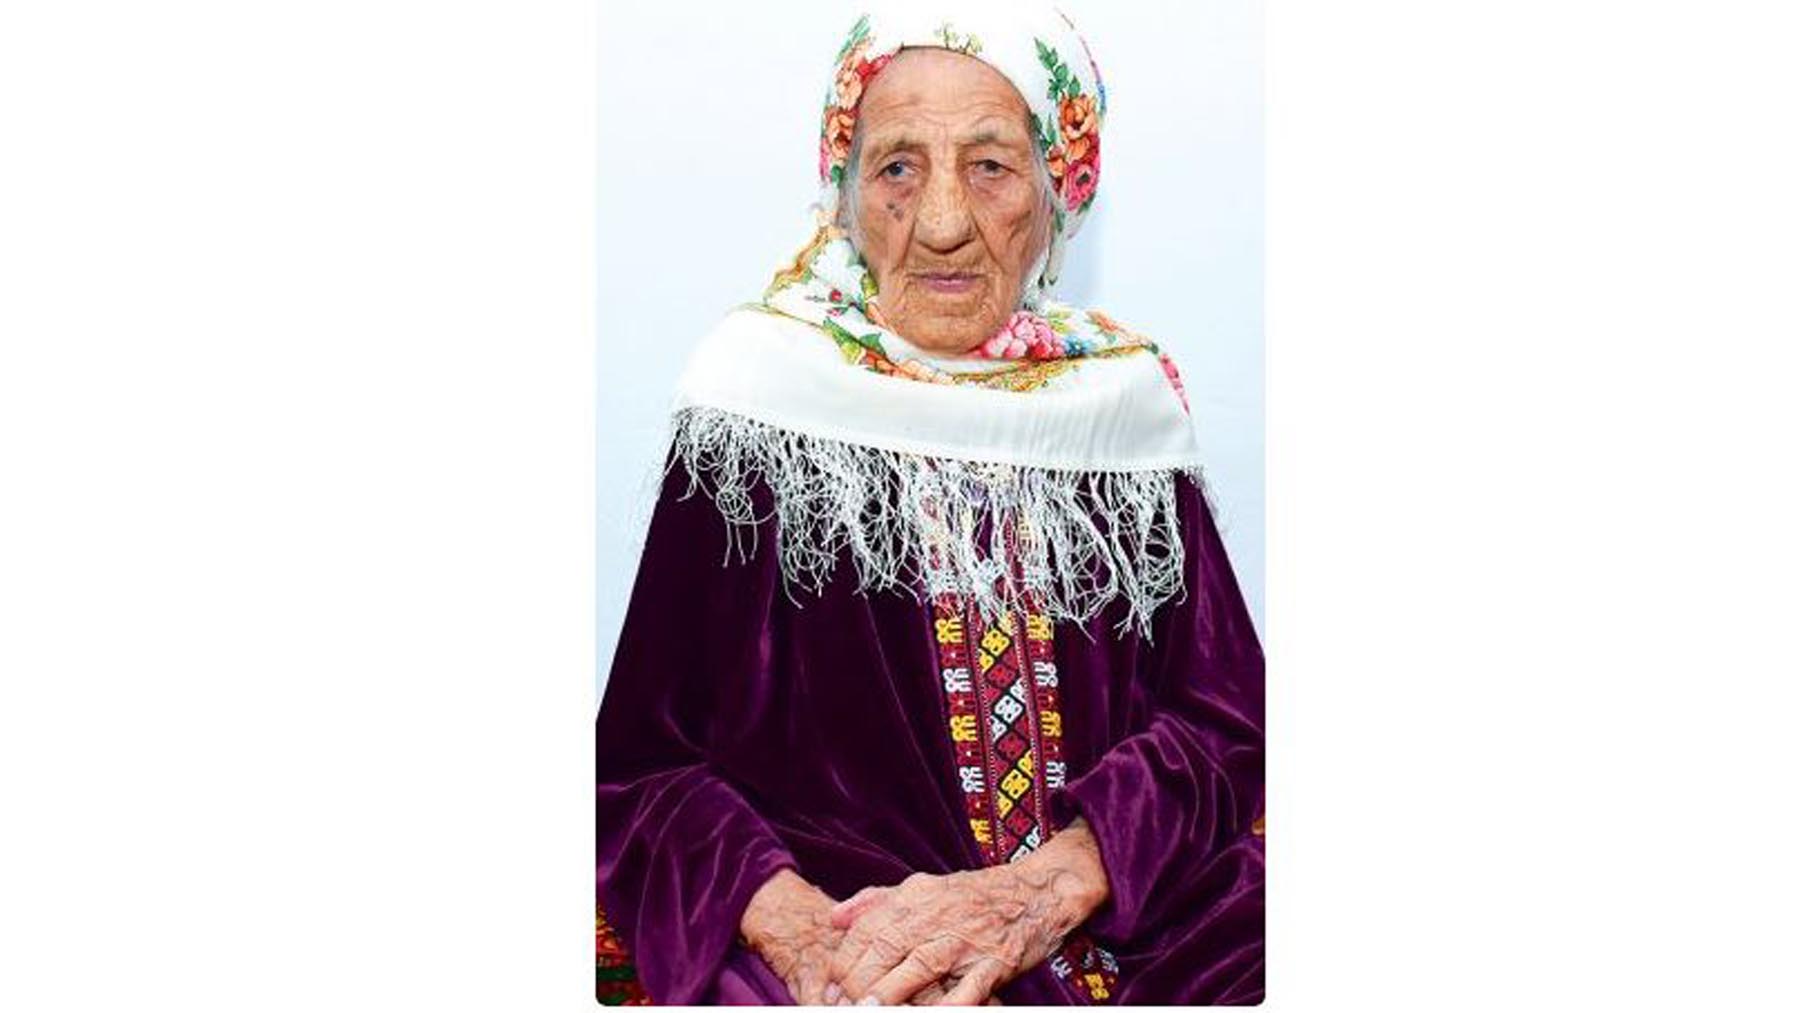 120-year-old Turkmen woman Ajapsoltan Hadjieva is the longest-lived person in the World